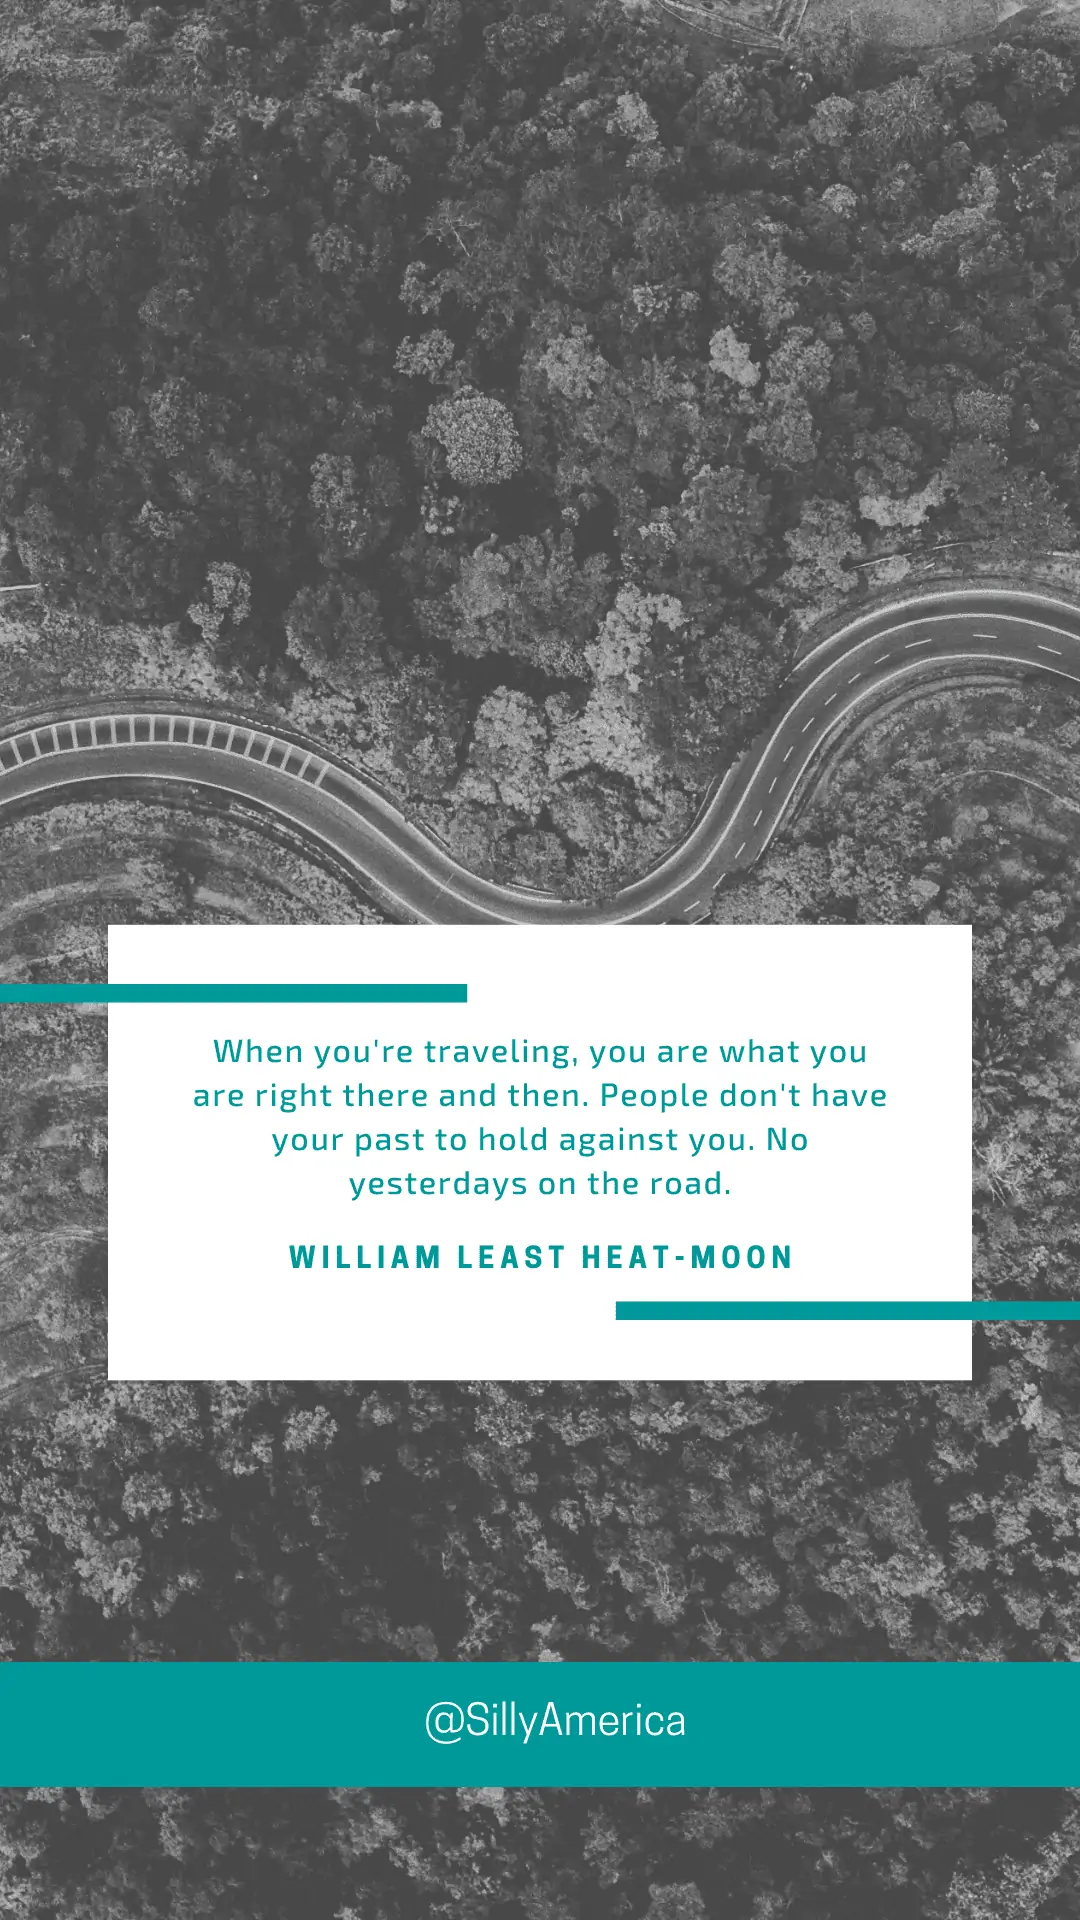 “When you’re traveling, you are what you are right there and then. People don’t have your past to hold against you. No yesterdays on the road.” William Least Heat-Moon, Blue Highways